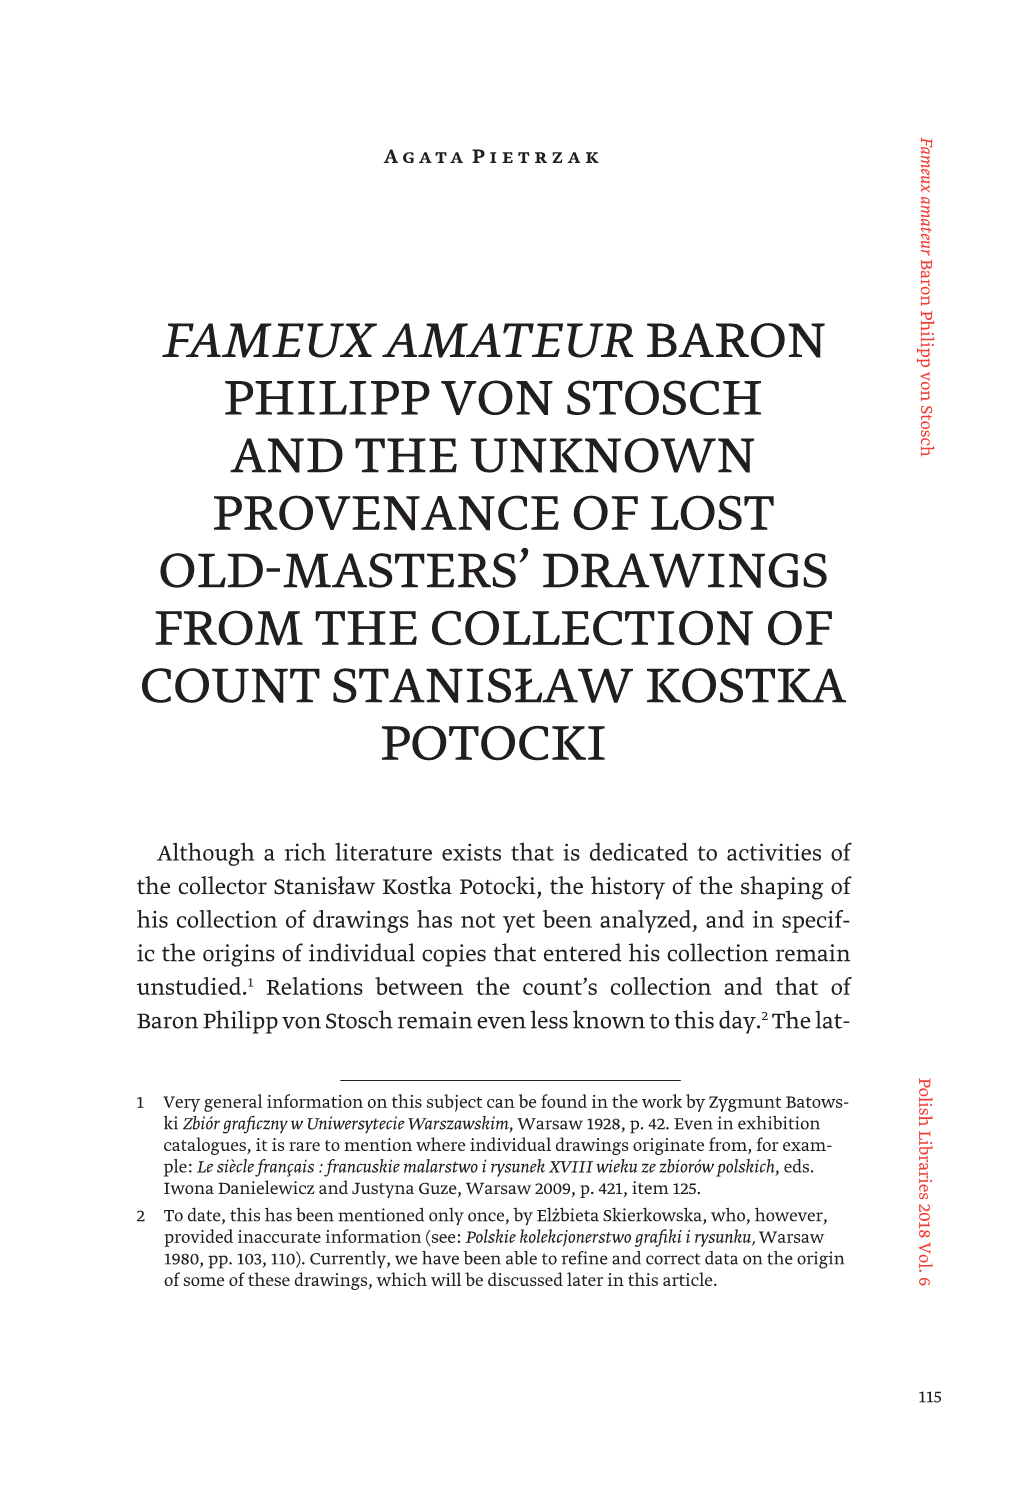 Fameux Amateur Baron Philipp Von Stosch and the Unknown Provenance of Lost Old Masters' Drawings from the Collection of Count